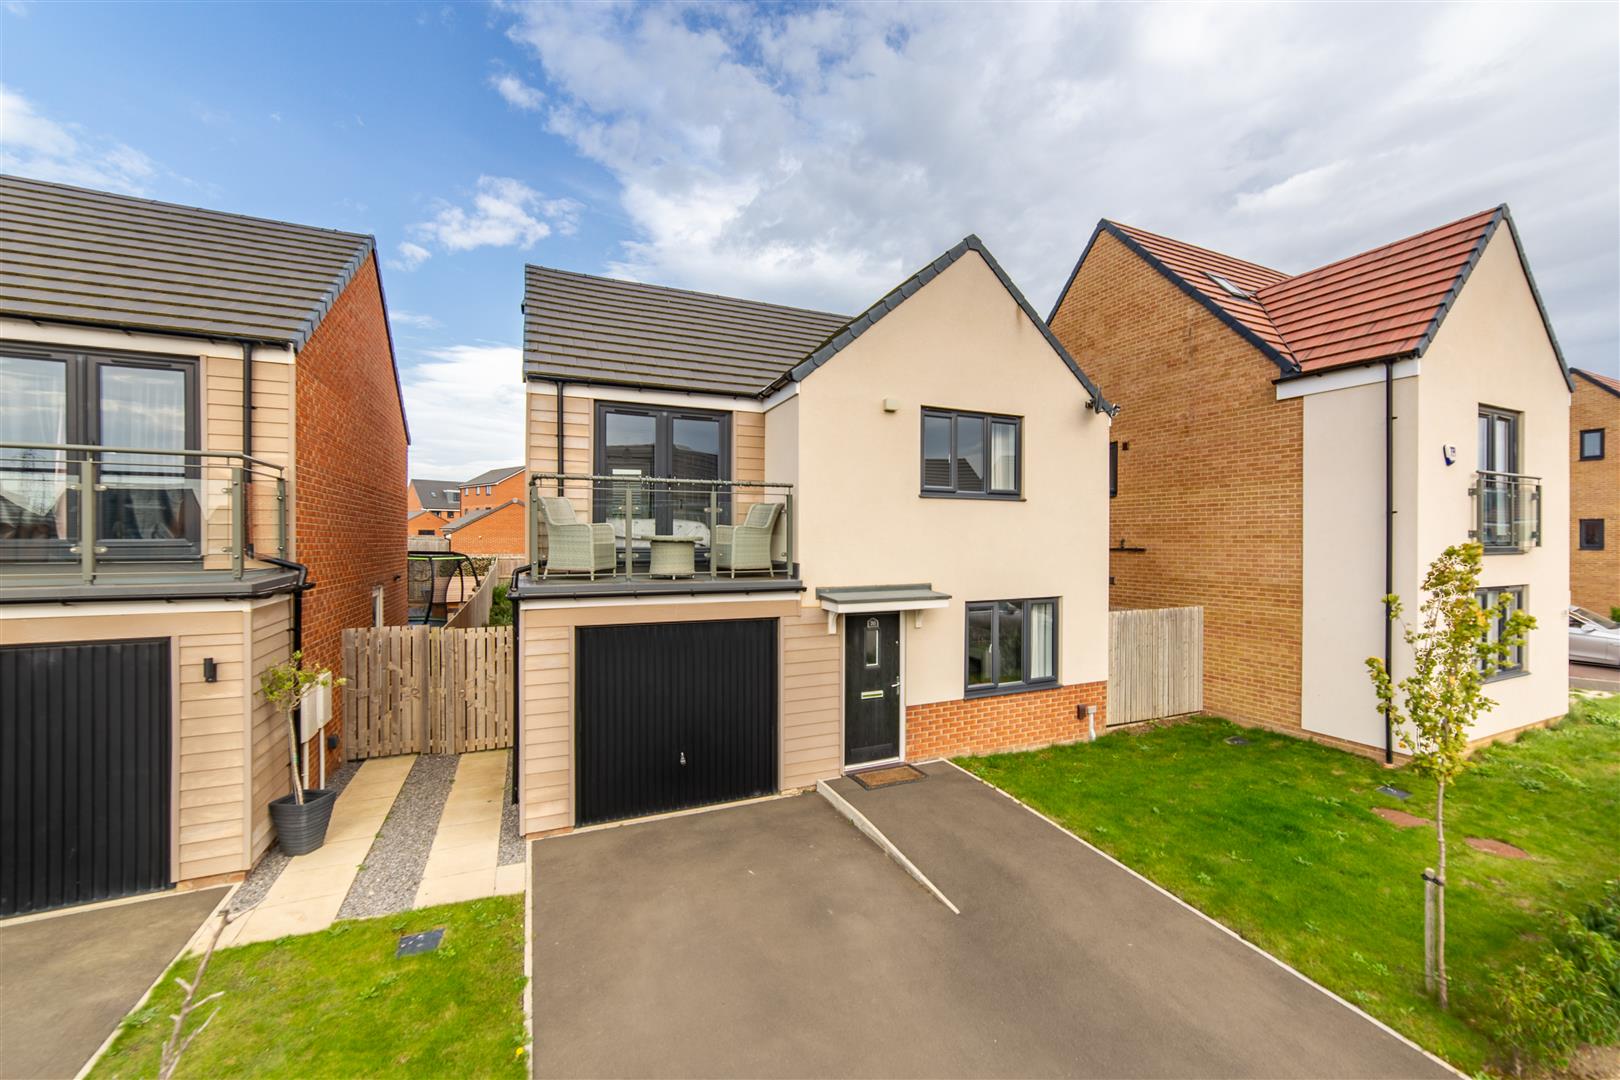 4 bed detached house for sale in Gatekeeper Close, Great Park, NE13